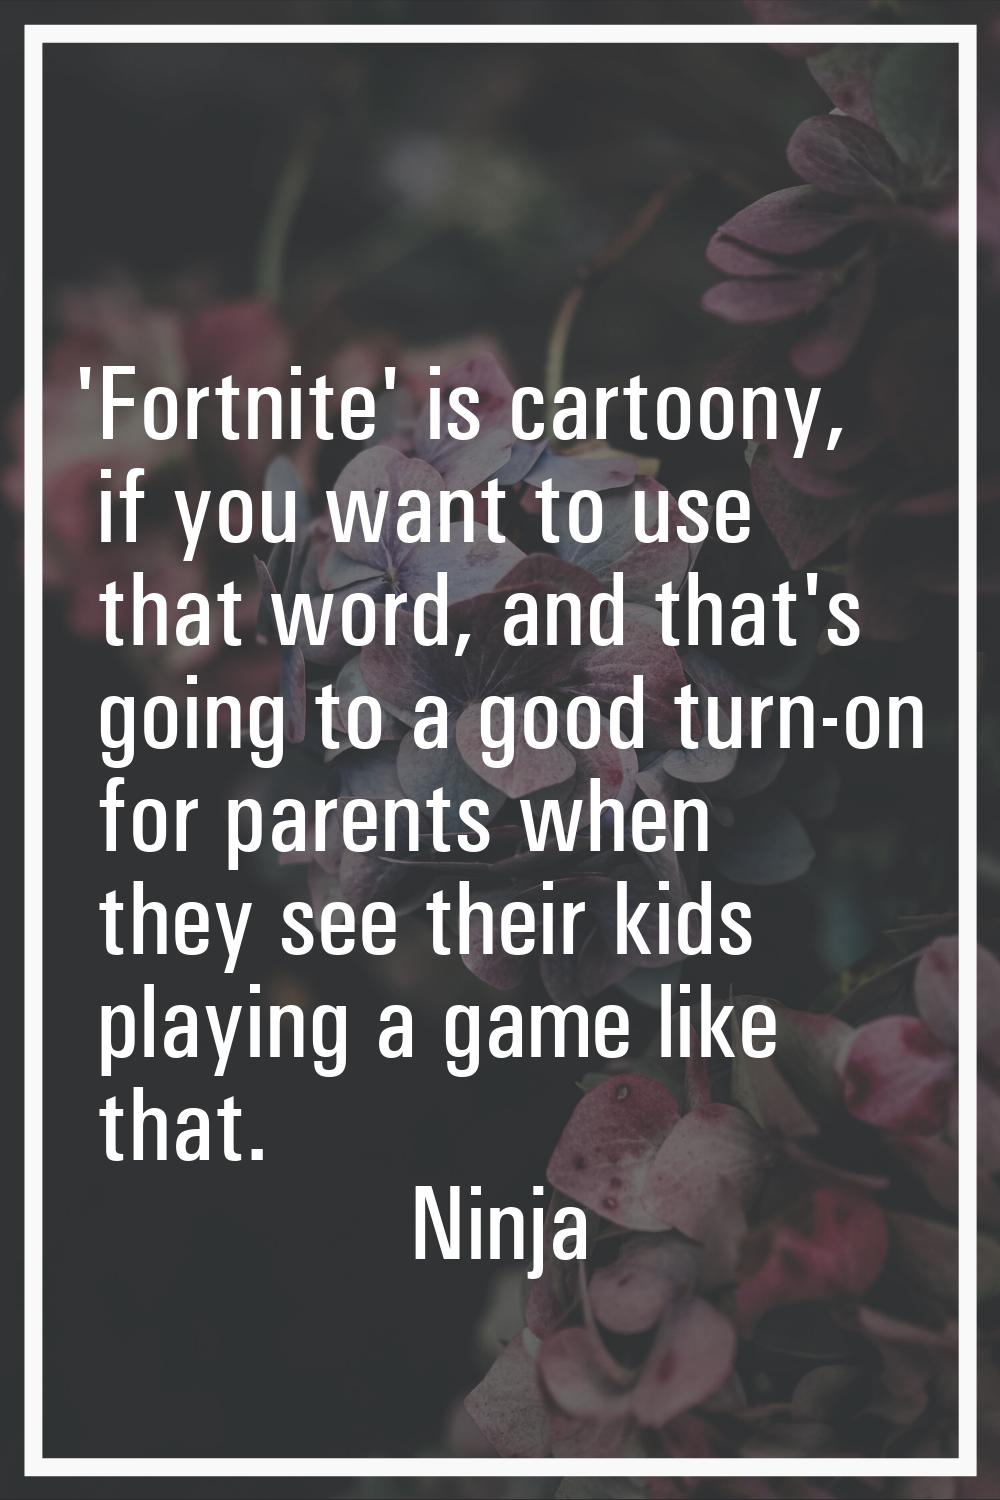 'Fortnite' is cartoony, if you want to use that word, and that's going to a good turn-on for parent